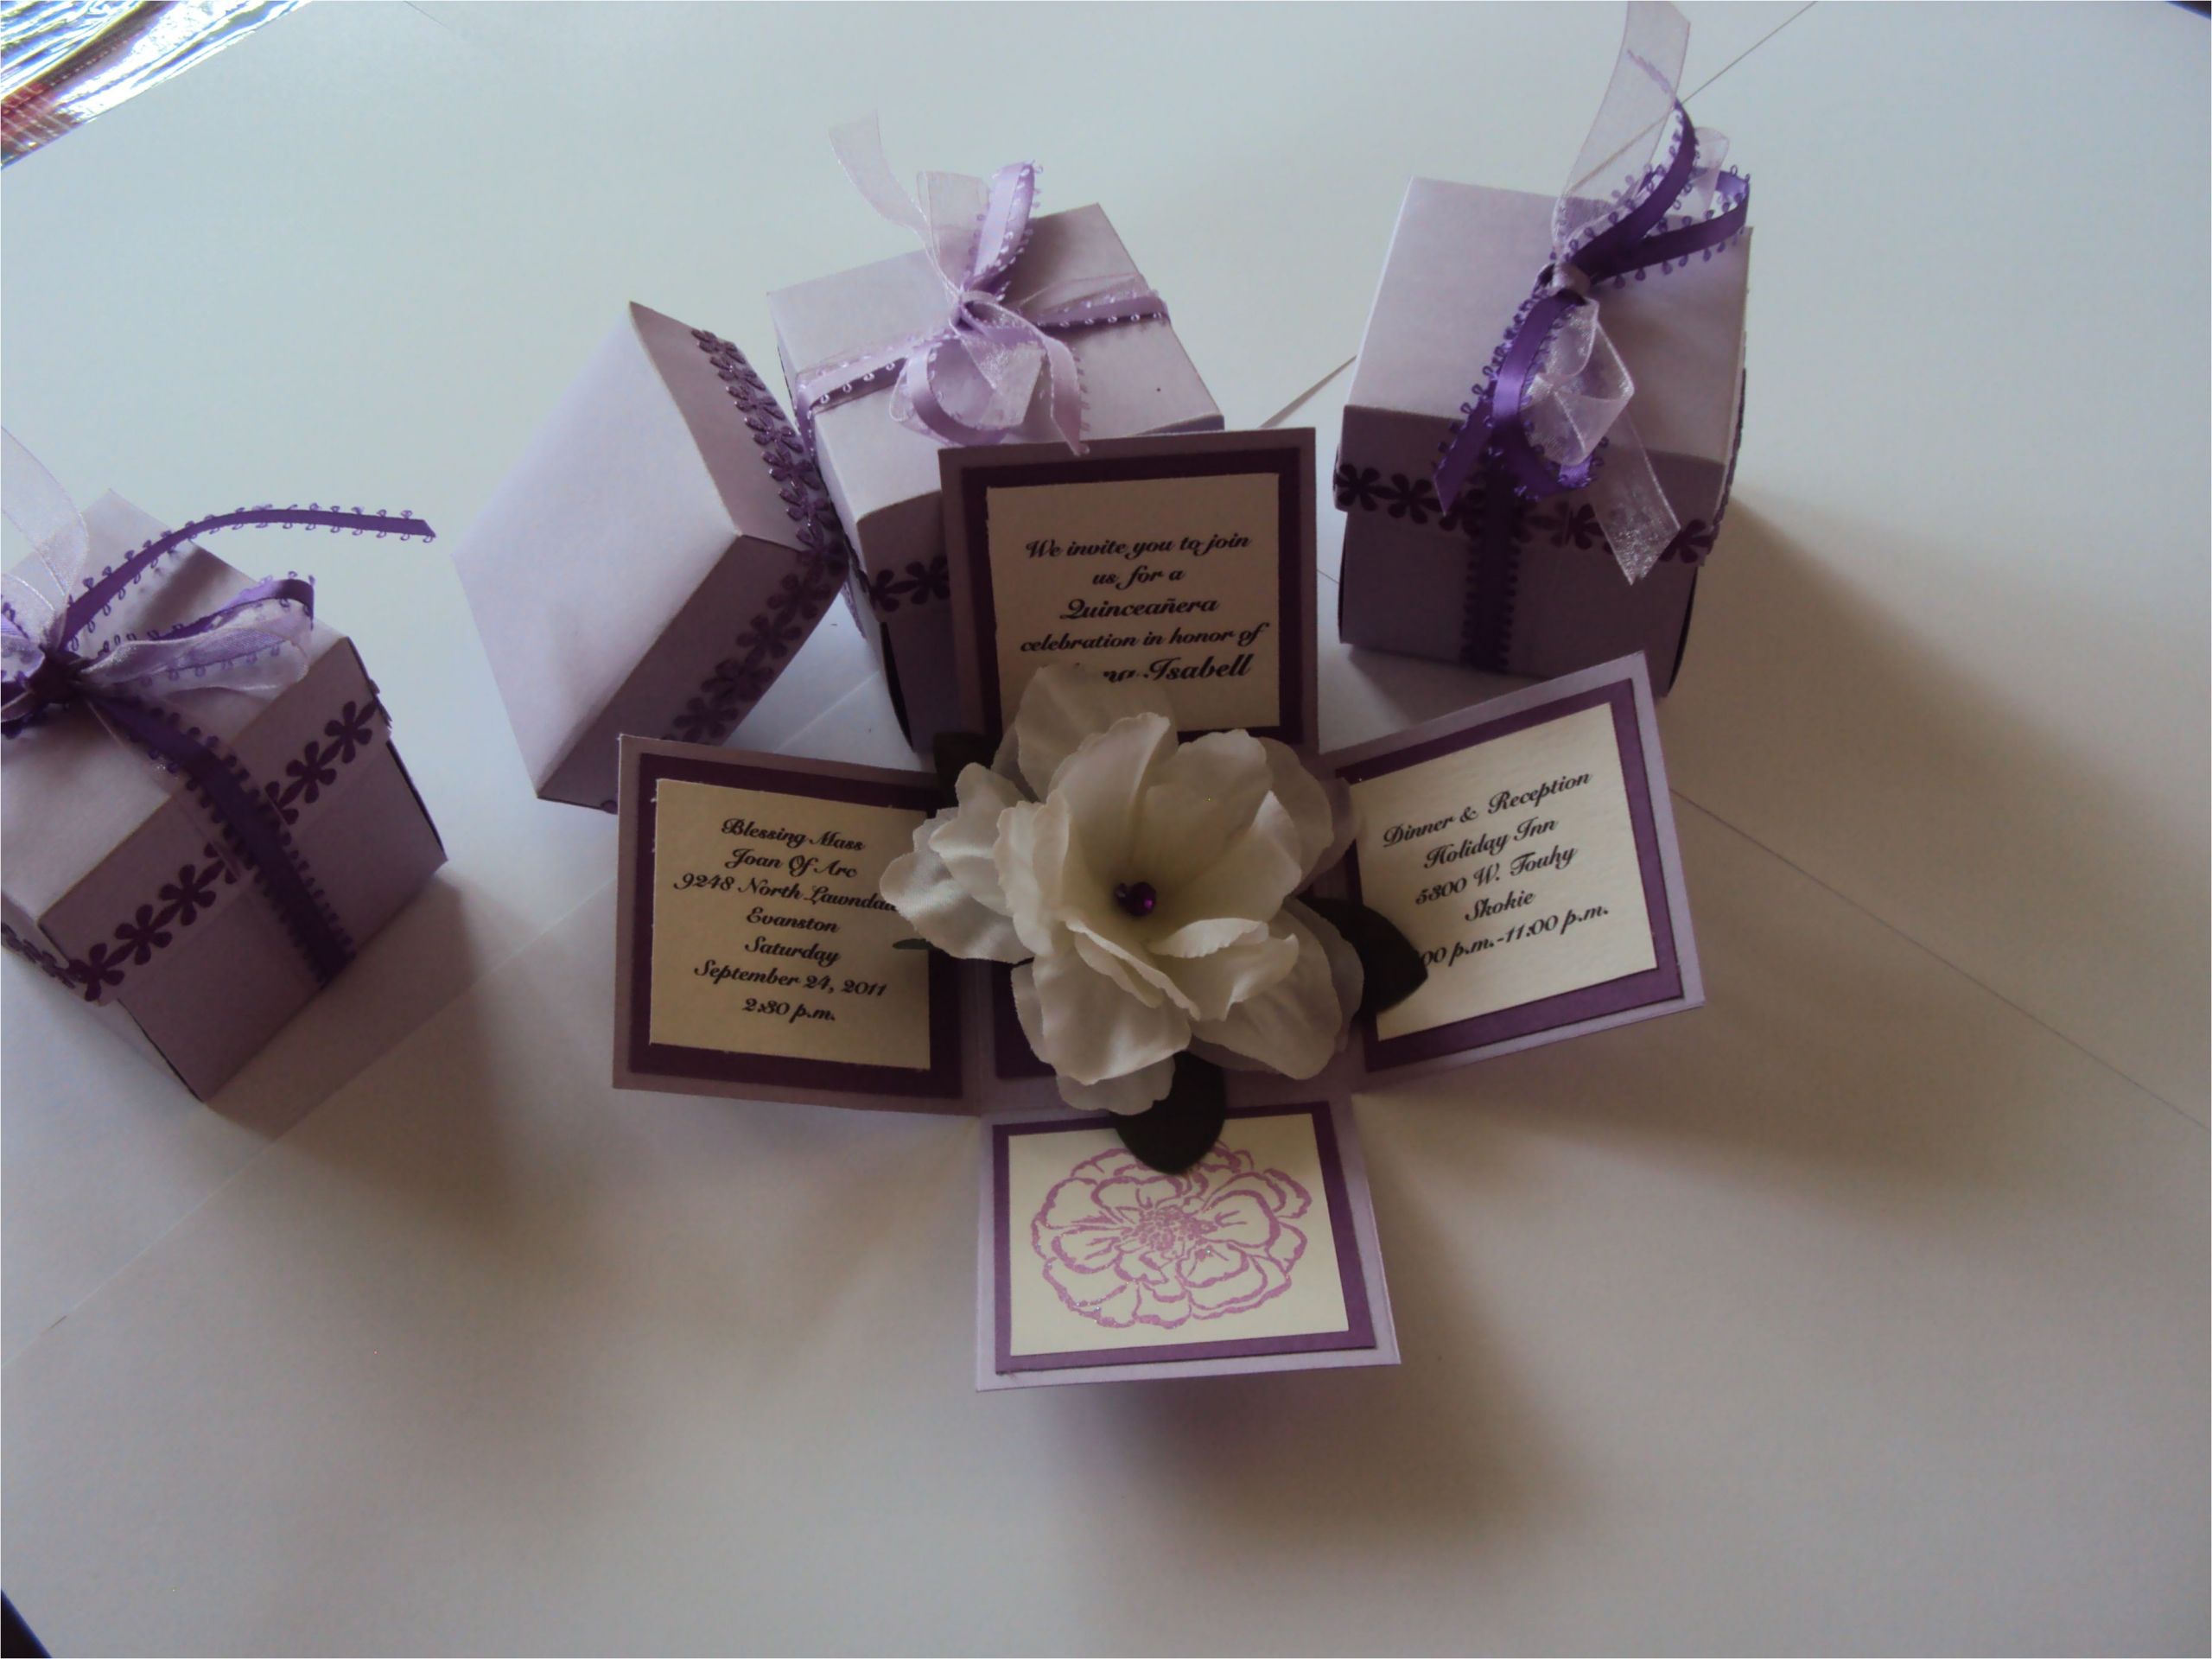 Diy Card Box for Quinceanera Explosion Box Invitations for My Niece S 15th Birthday